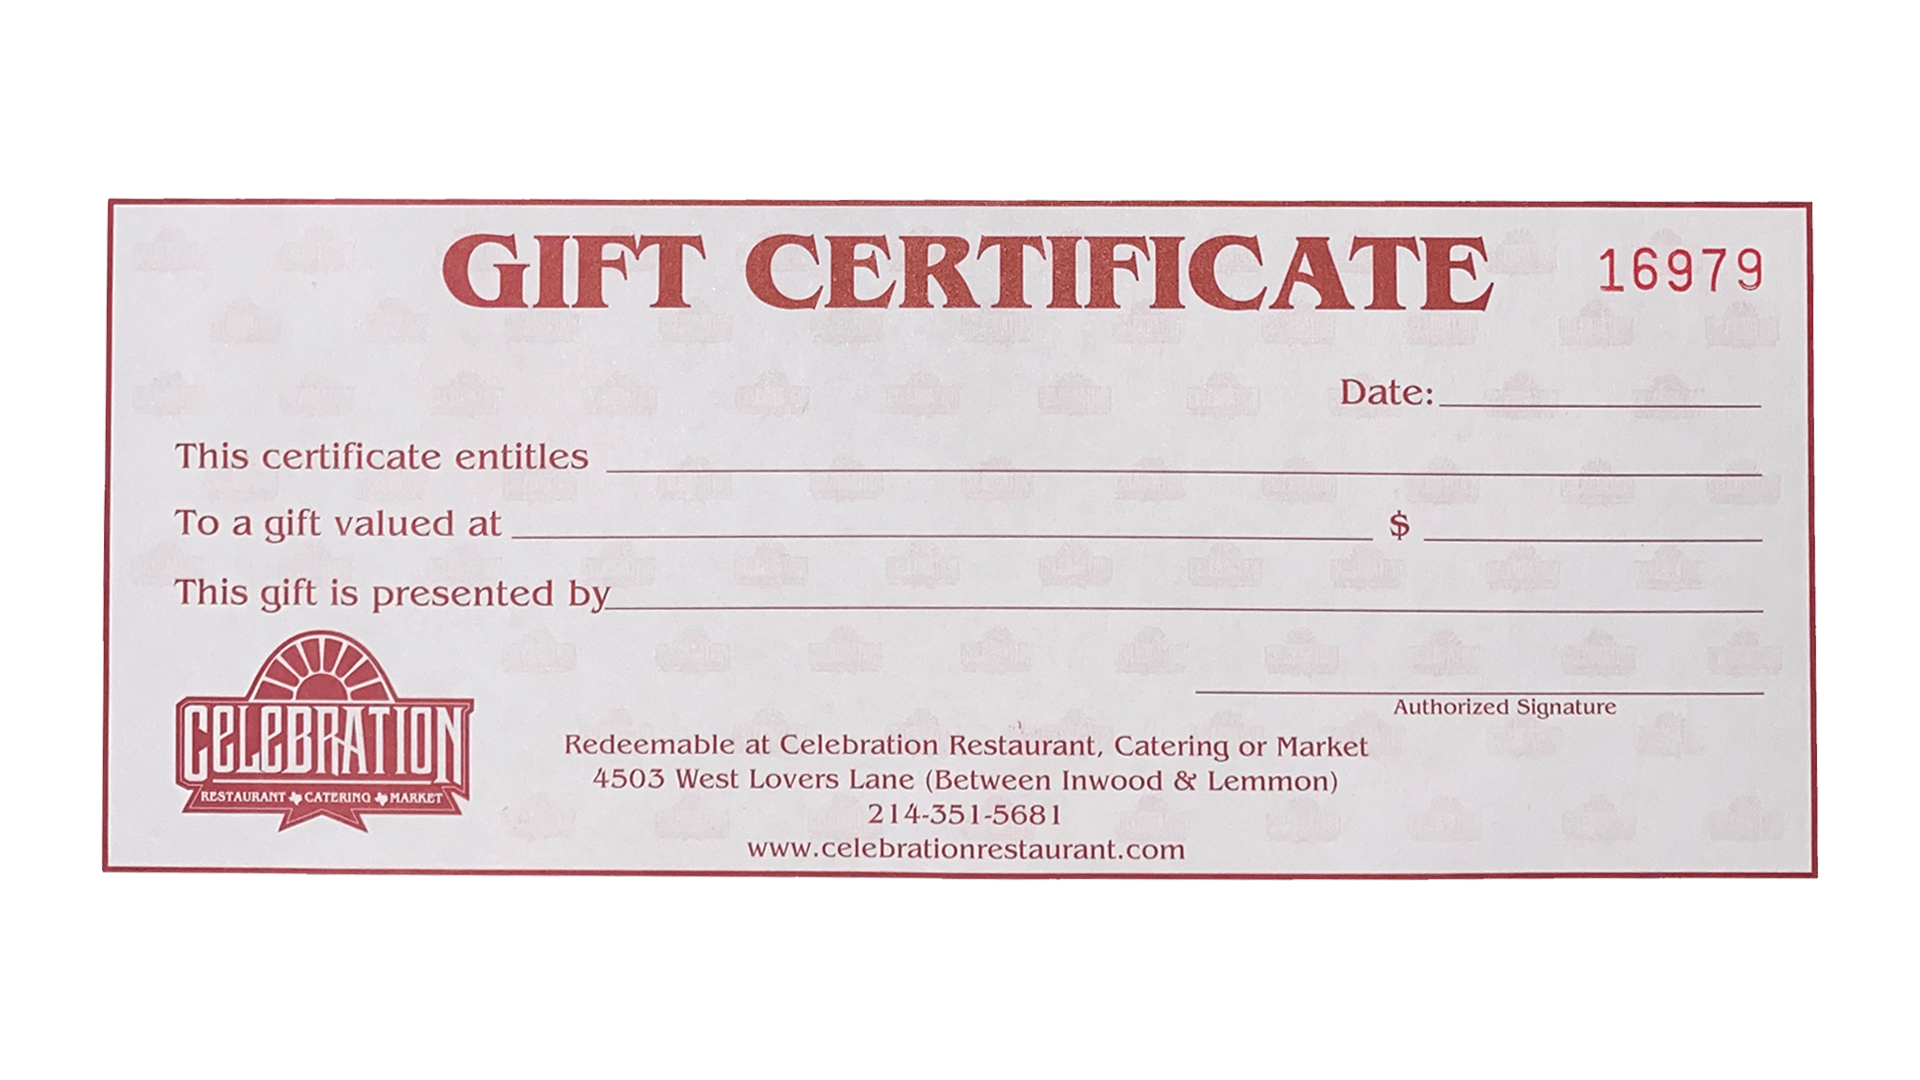 Restaurant gift cards come with holiday bonus for you